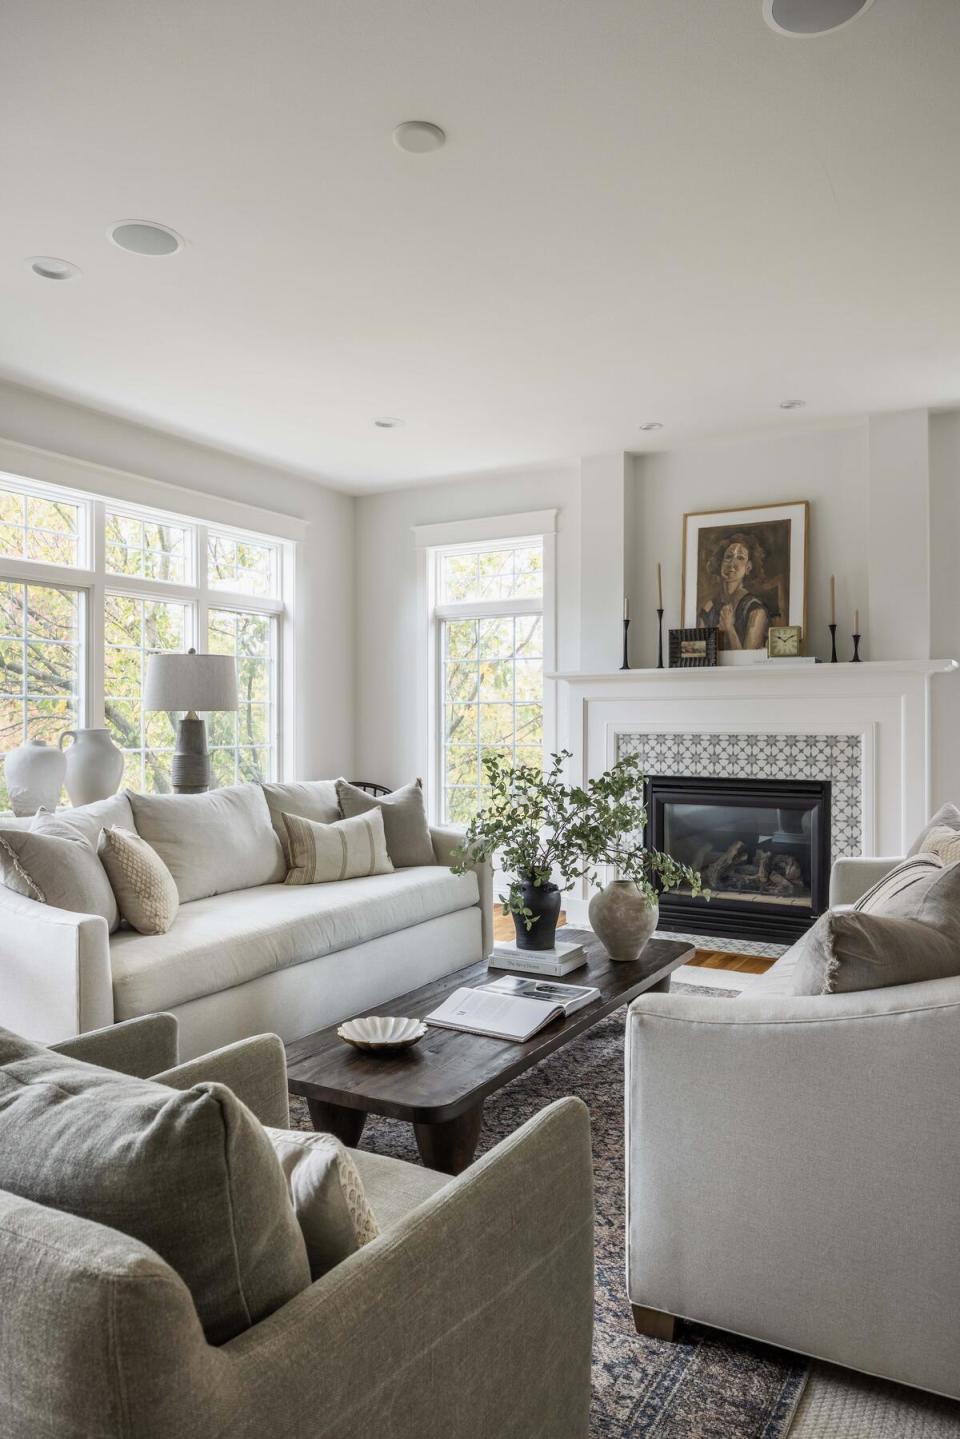 A muted, gray living room featuring a fireplace tiled with a geometric motif